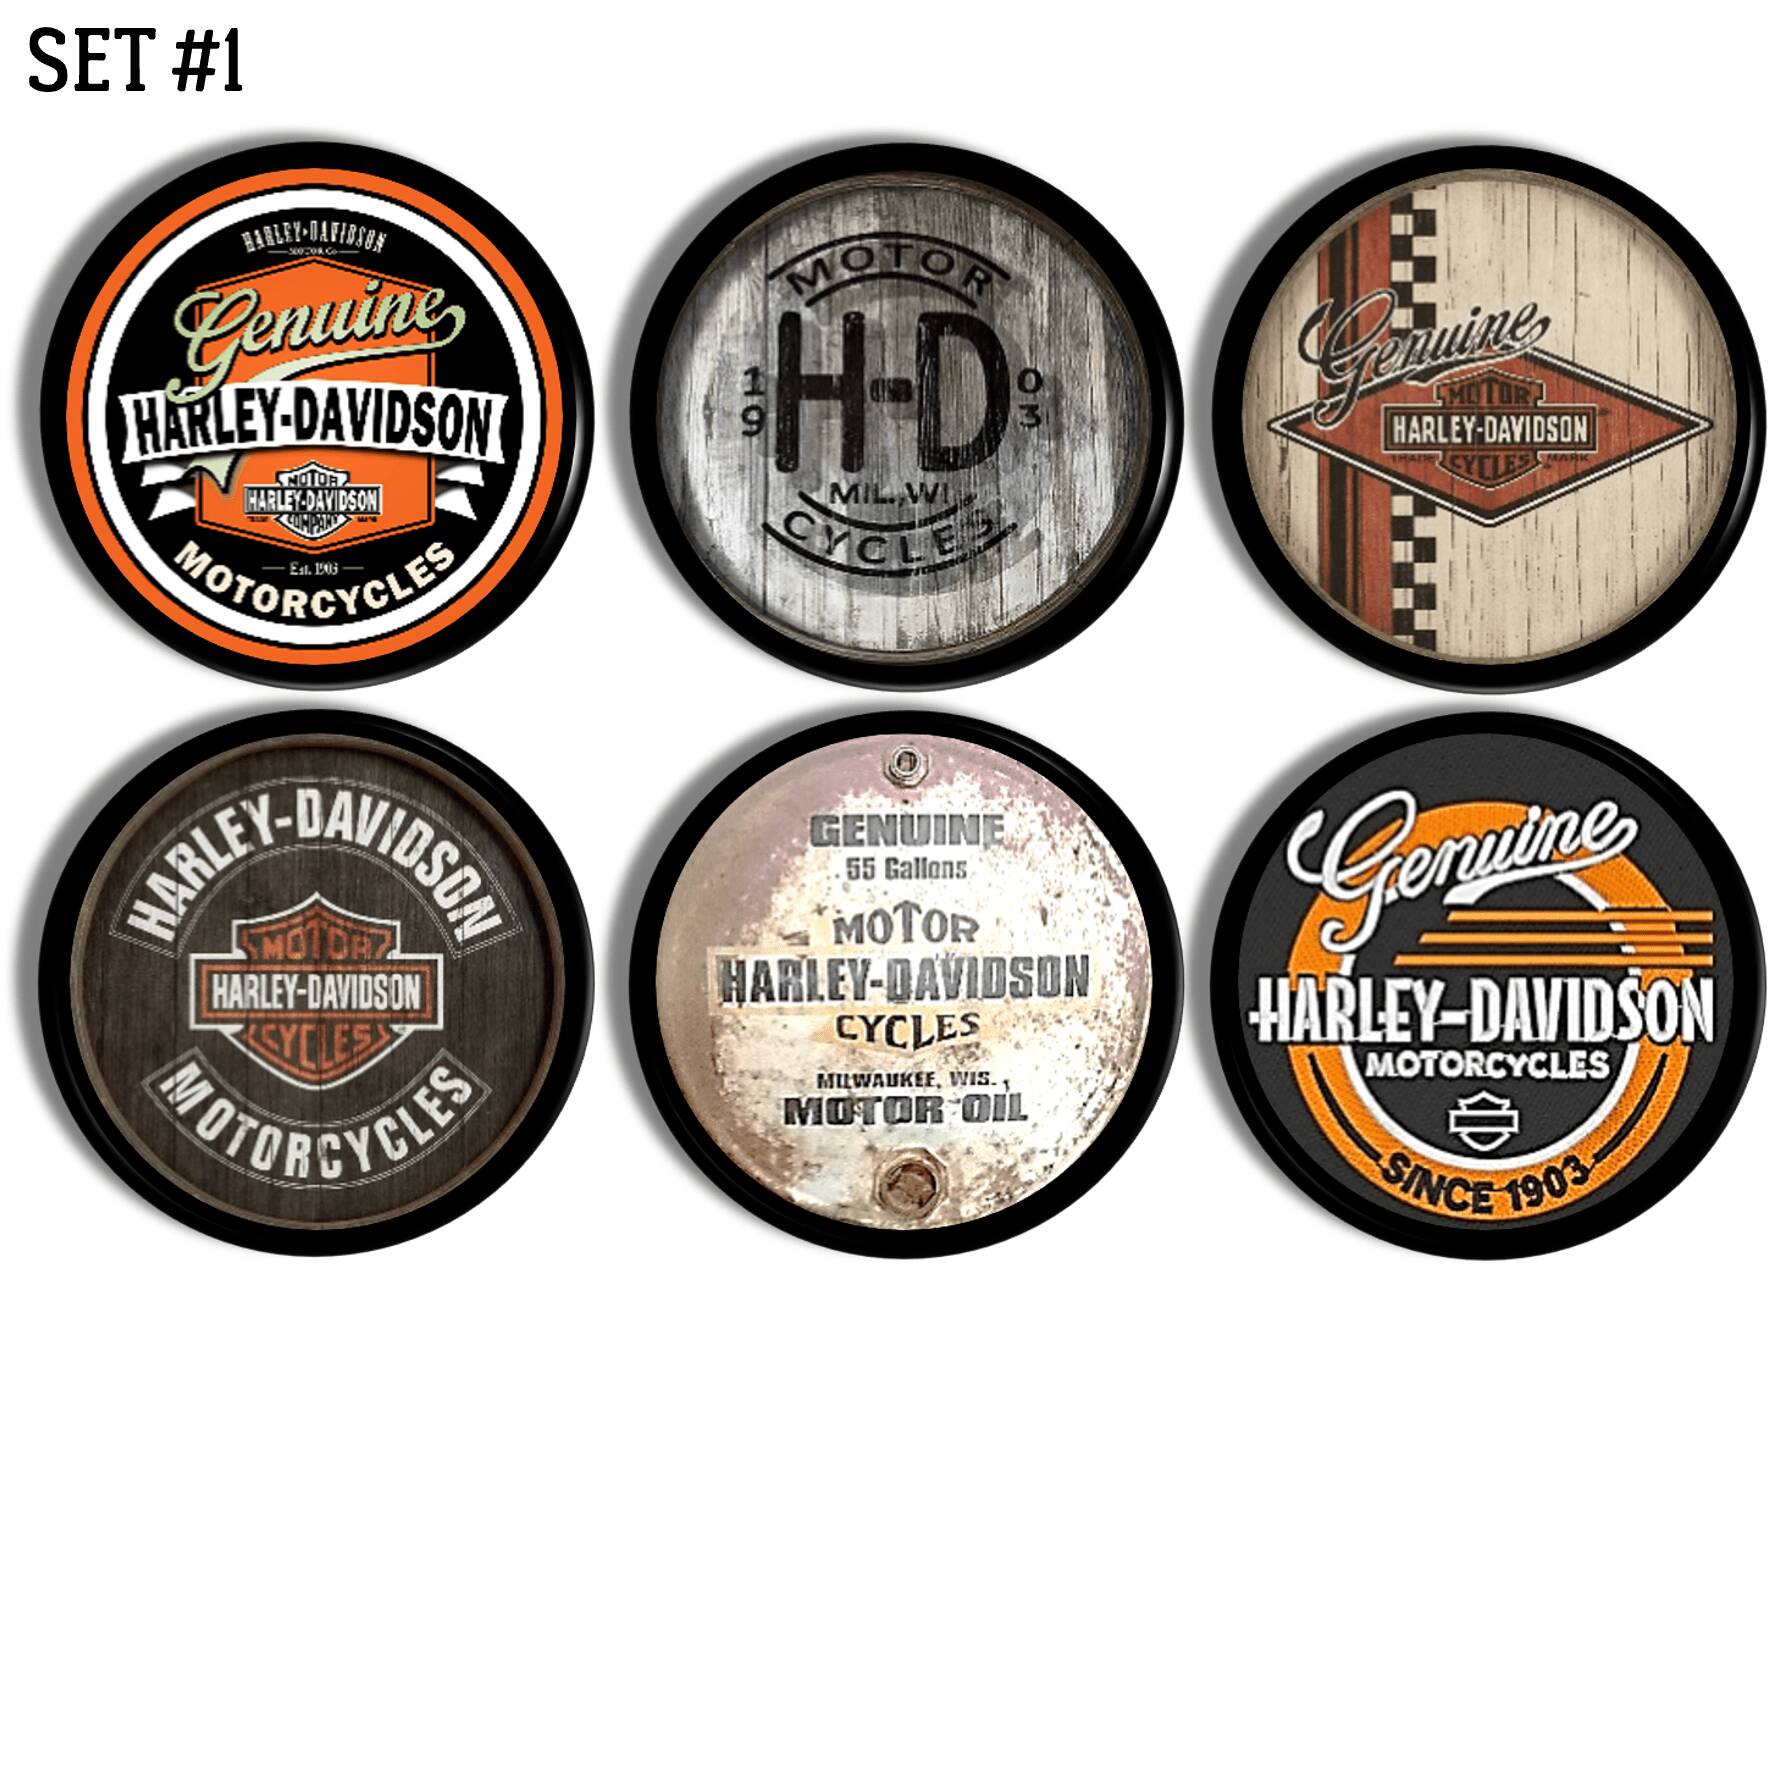 Vintage inspired decorative knobs in a classic Harley Davidson theme on black handle hardware.